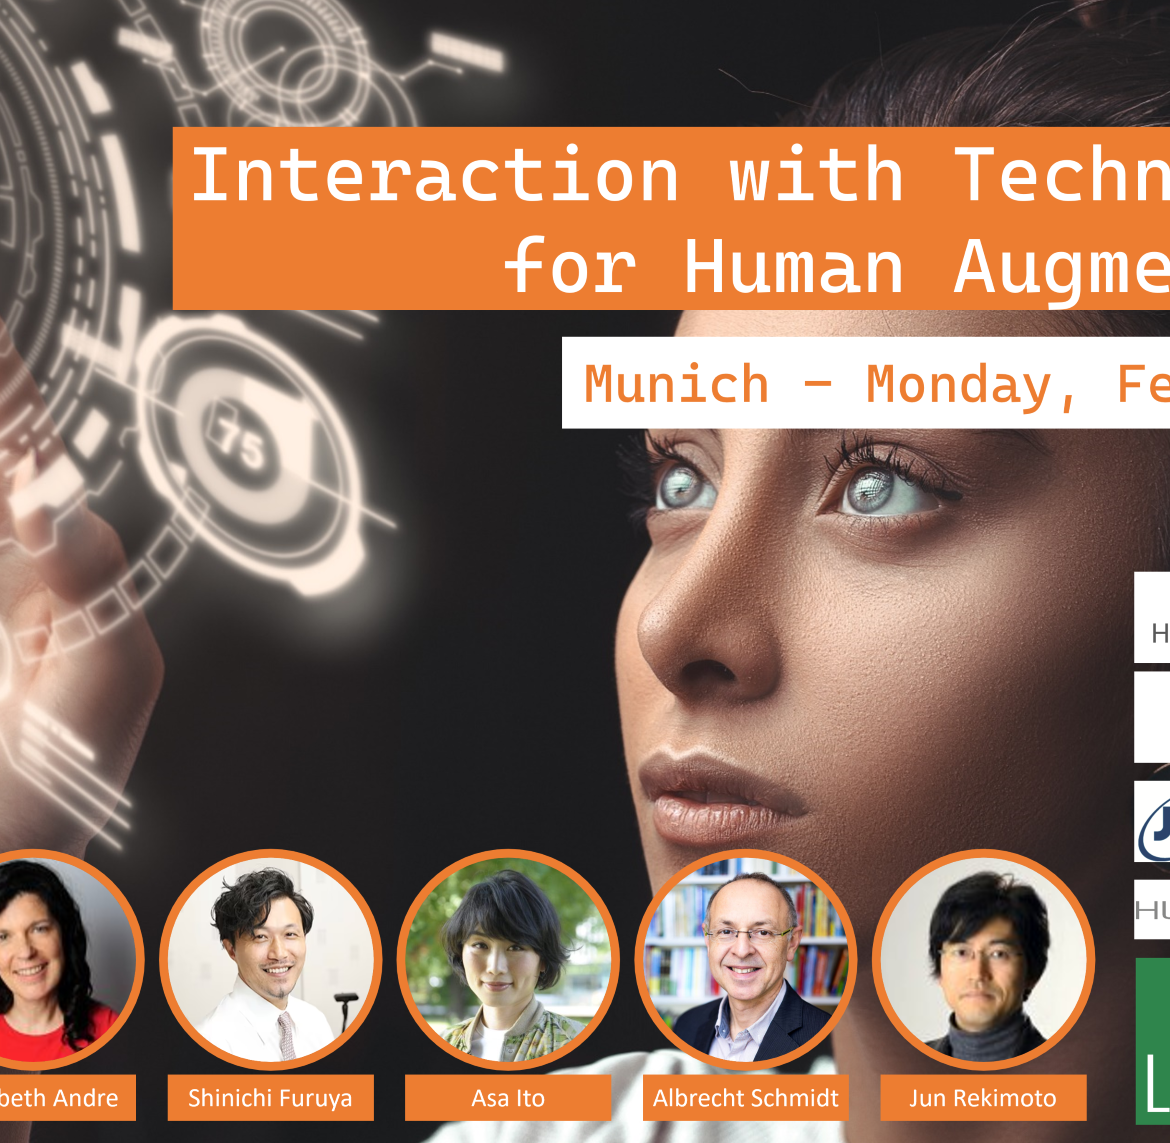 Symposium on Interaction with Technologies for Human Augmentation